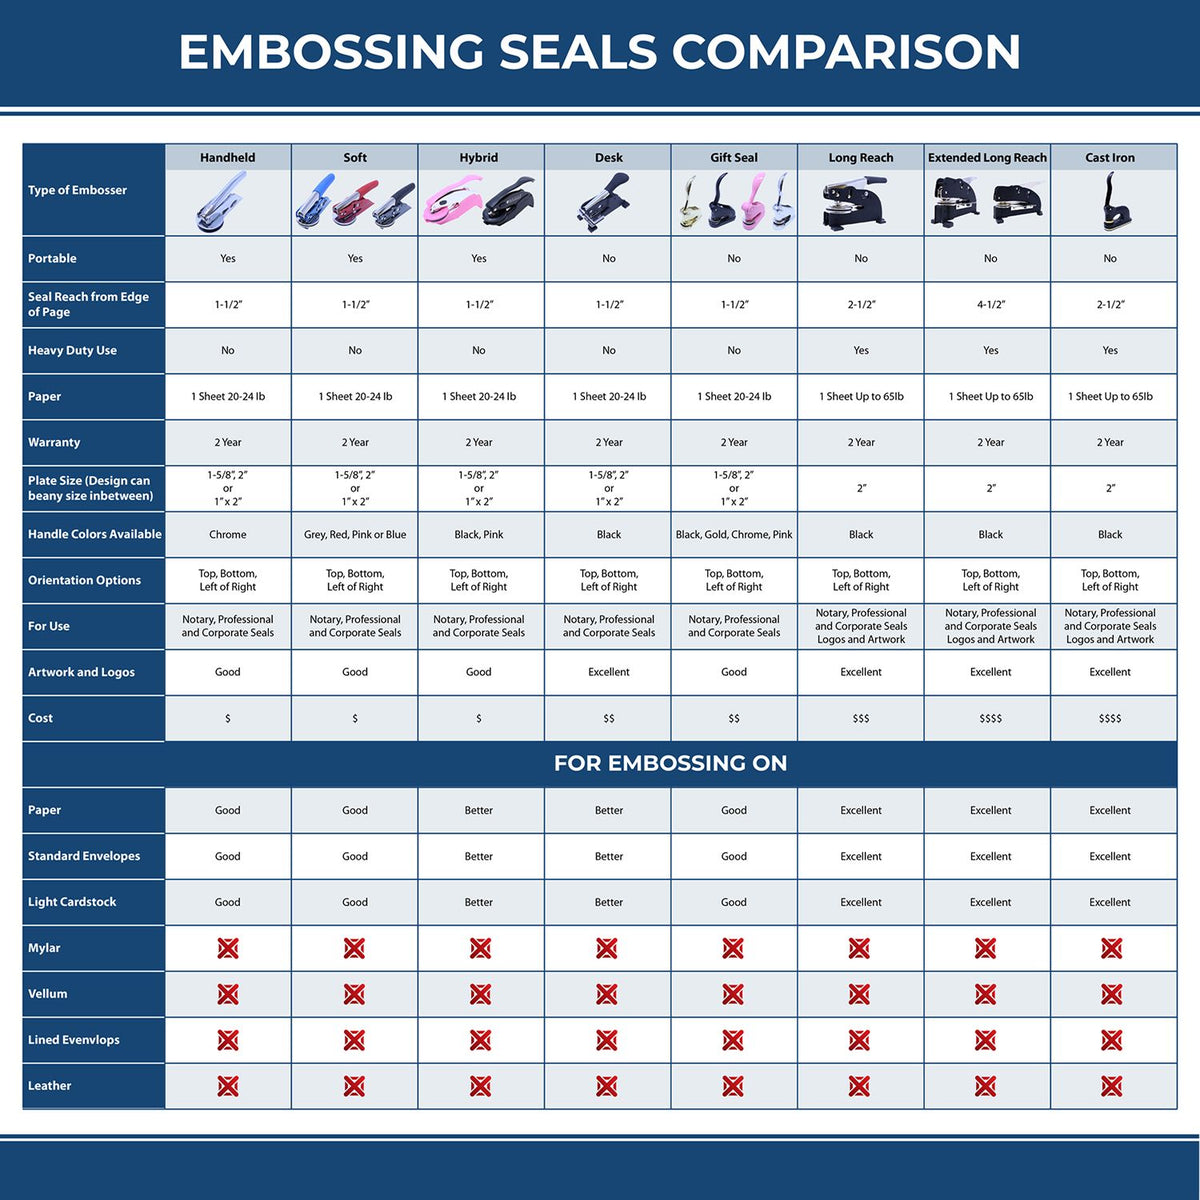 A comparison chart for the different types of mount models available for the State of Hawaii Long Reach Architectural Embossing Seal.